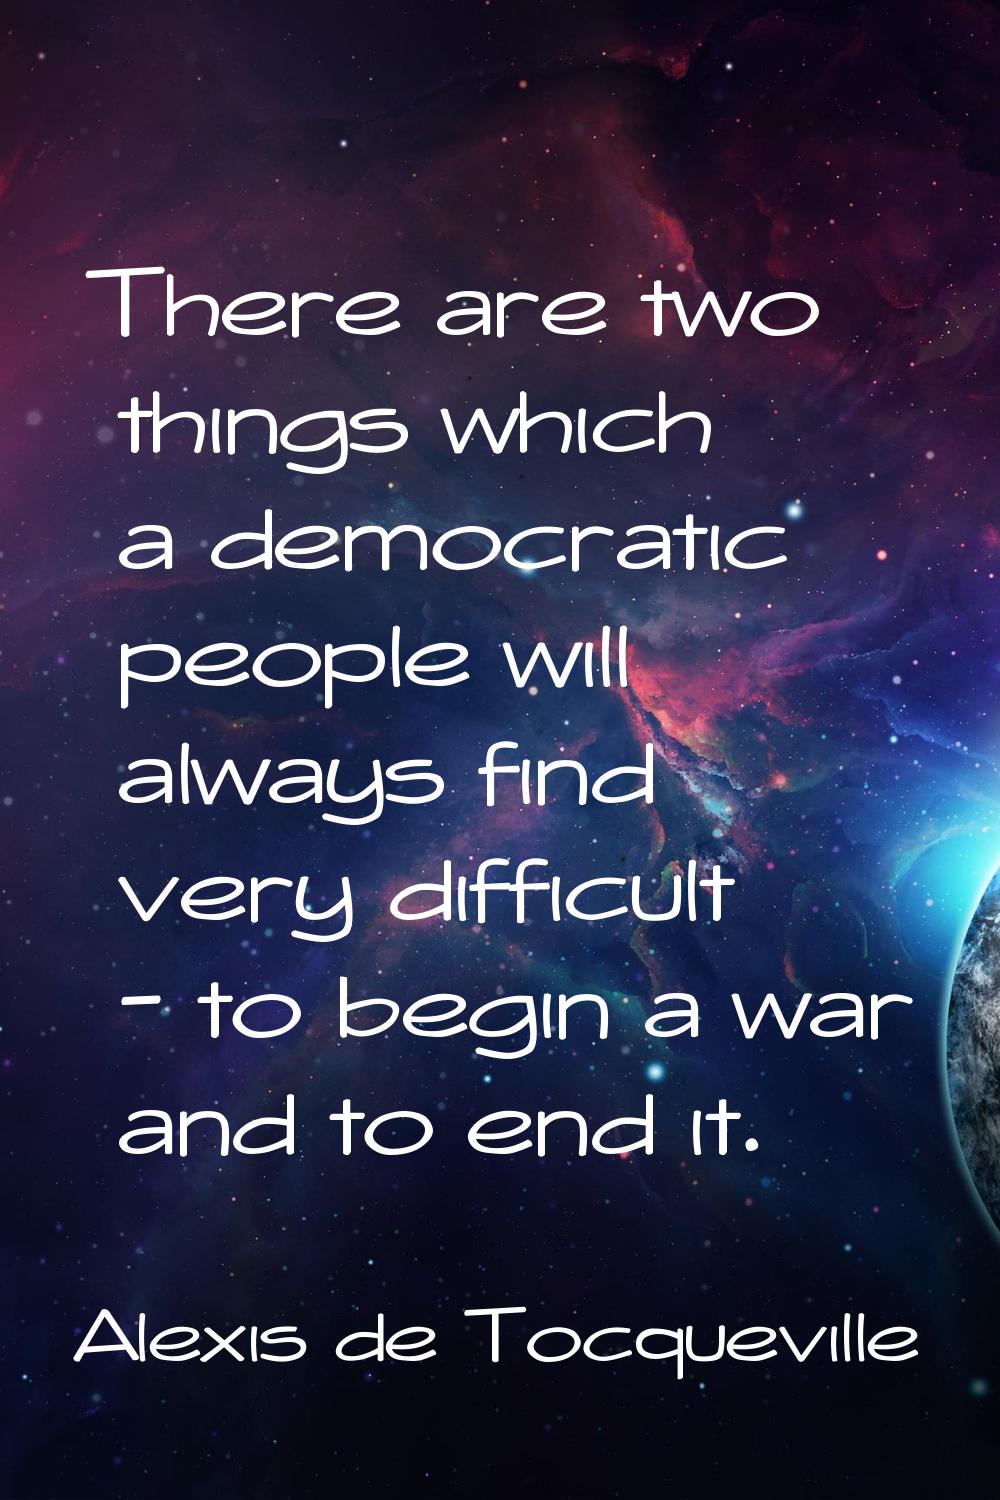 There are two things which a democratic people will always find very difficult - to begin a war and